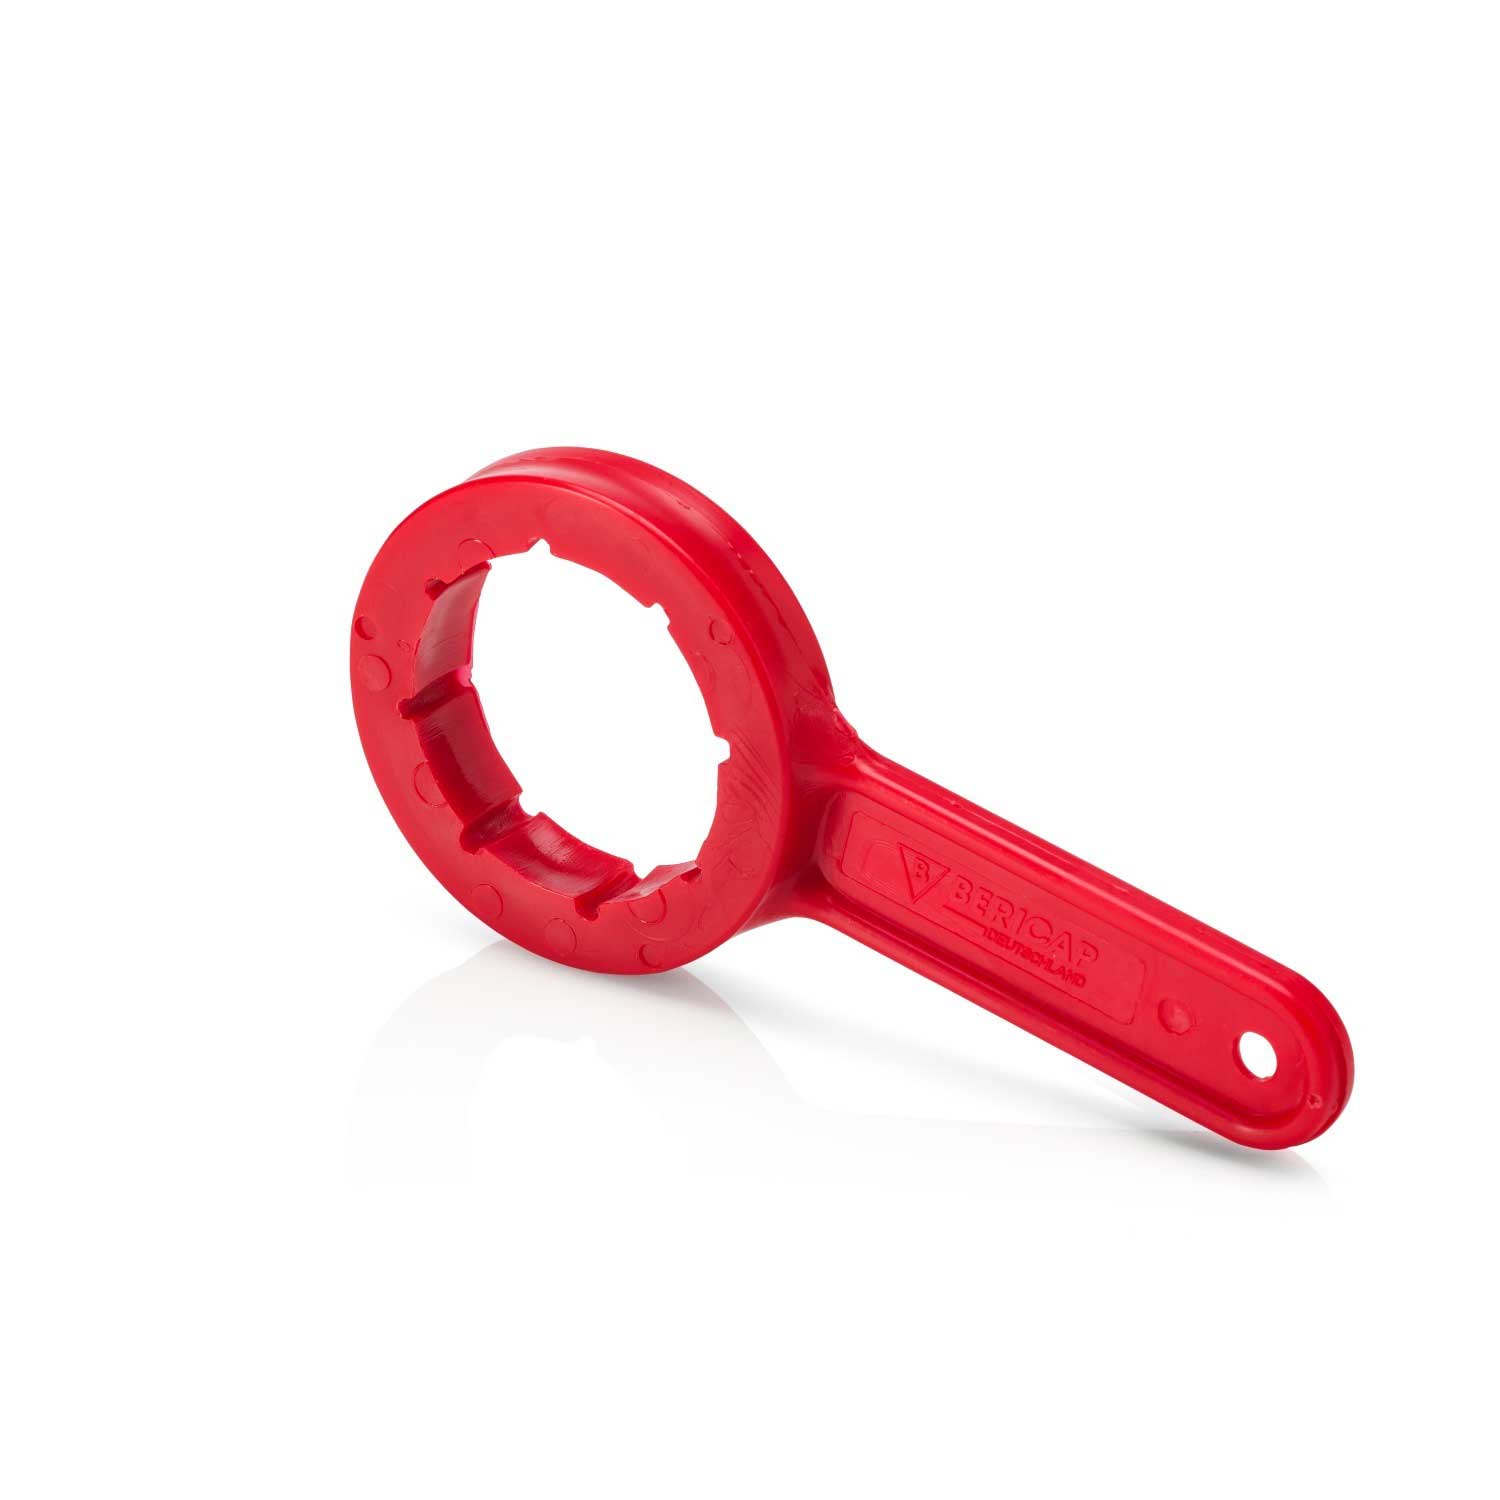 Supplier Of Cap Removal Tool to suit 61mm Caps